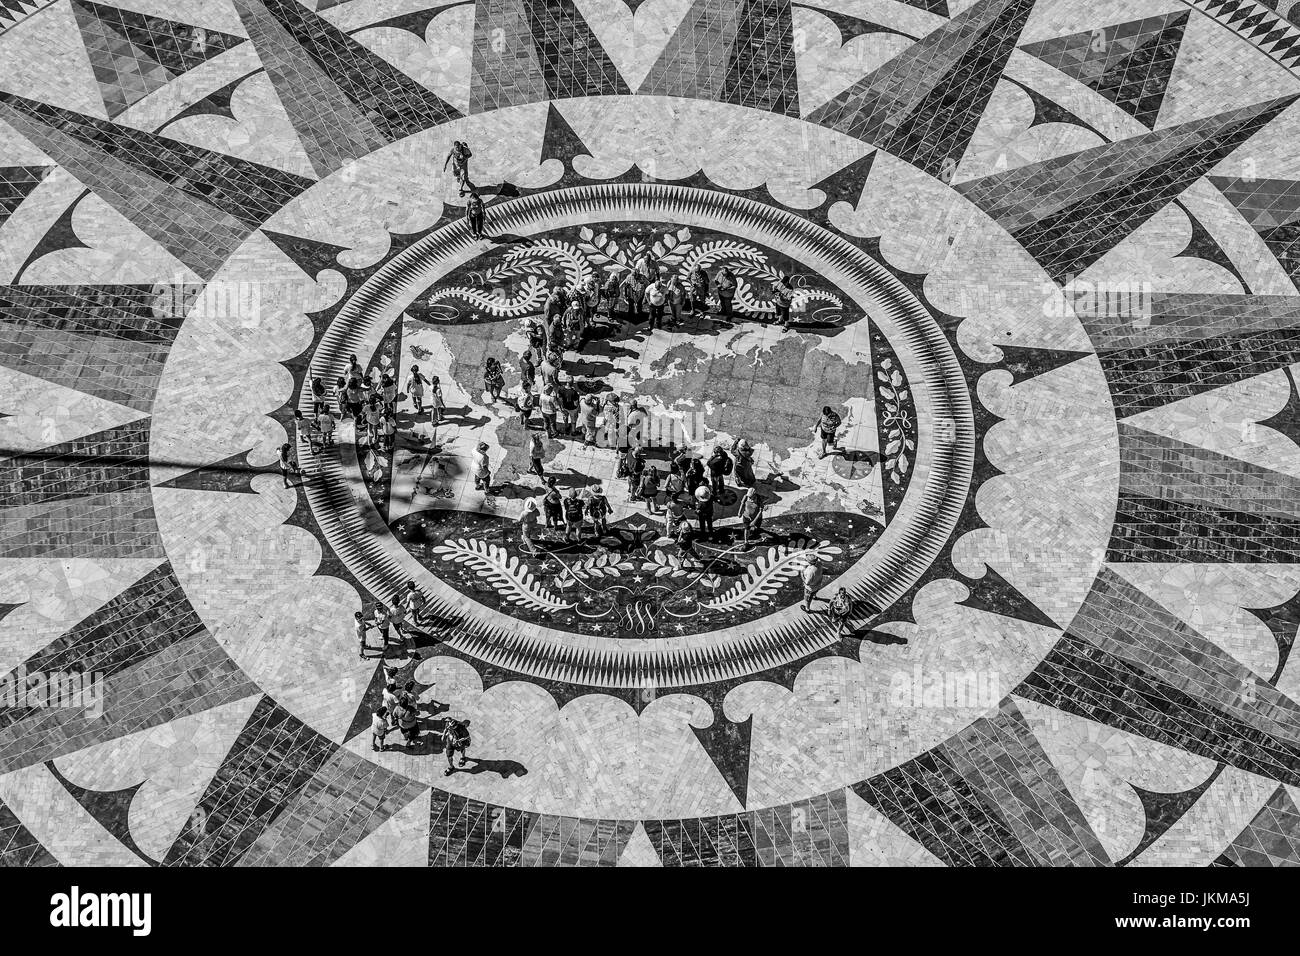 The famous compass rose at the Monument of the Discoveries in Lisbon Belem - LISBON, PORTUGAL 2017 - LISBON, PORTUGAL 2017 Stock Photo